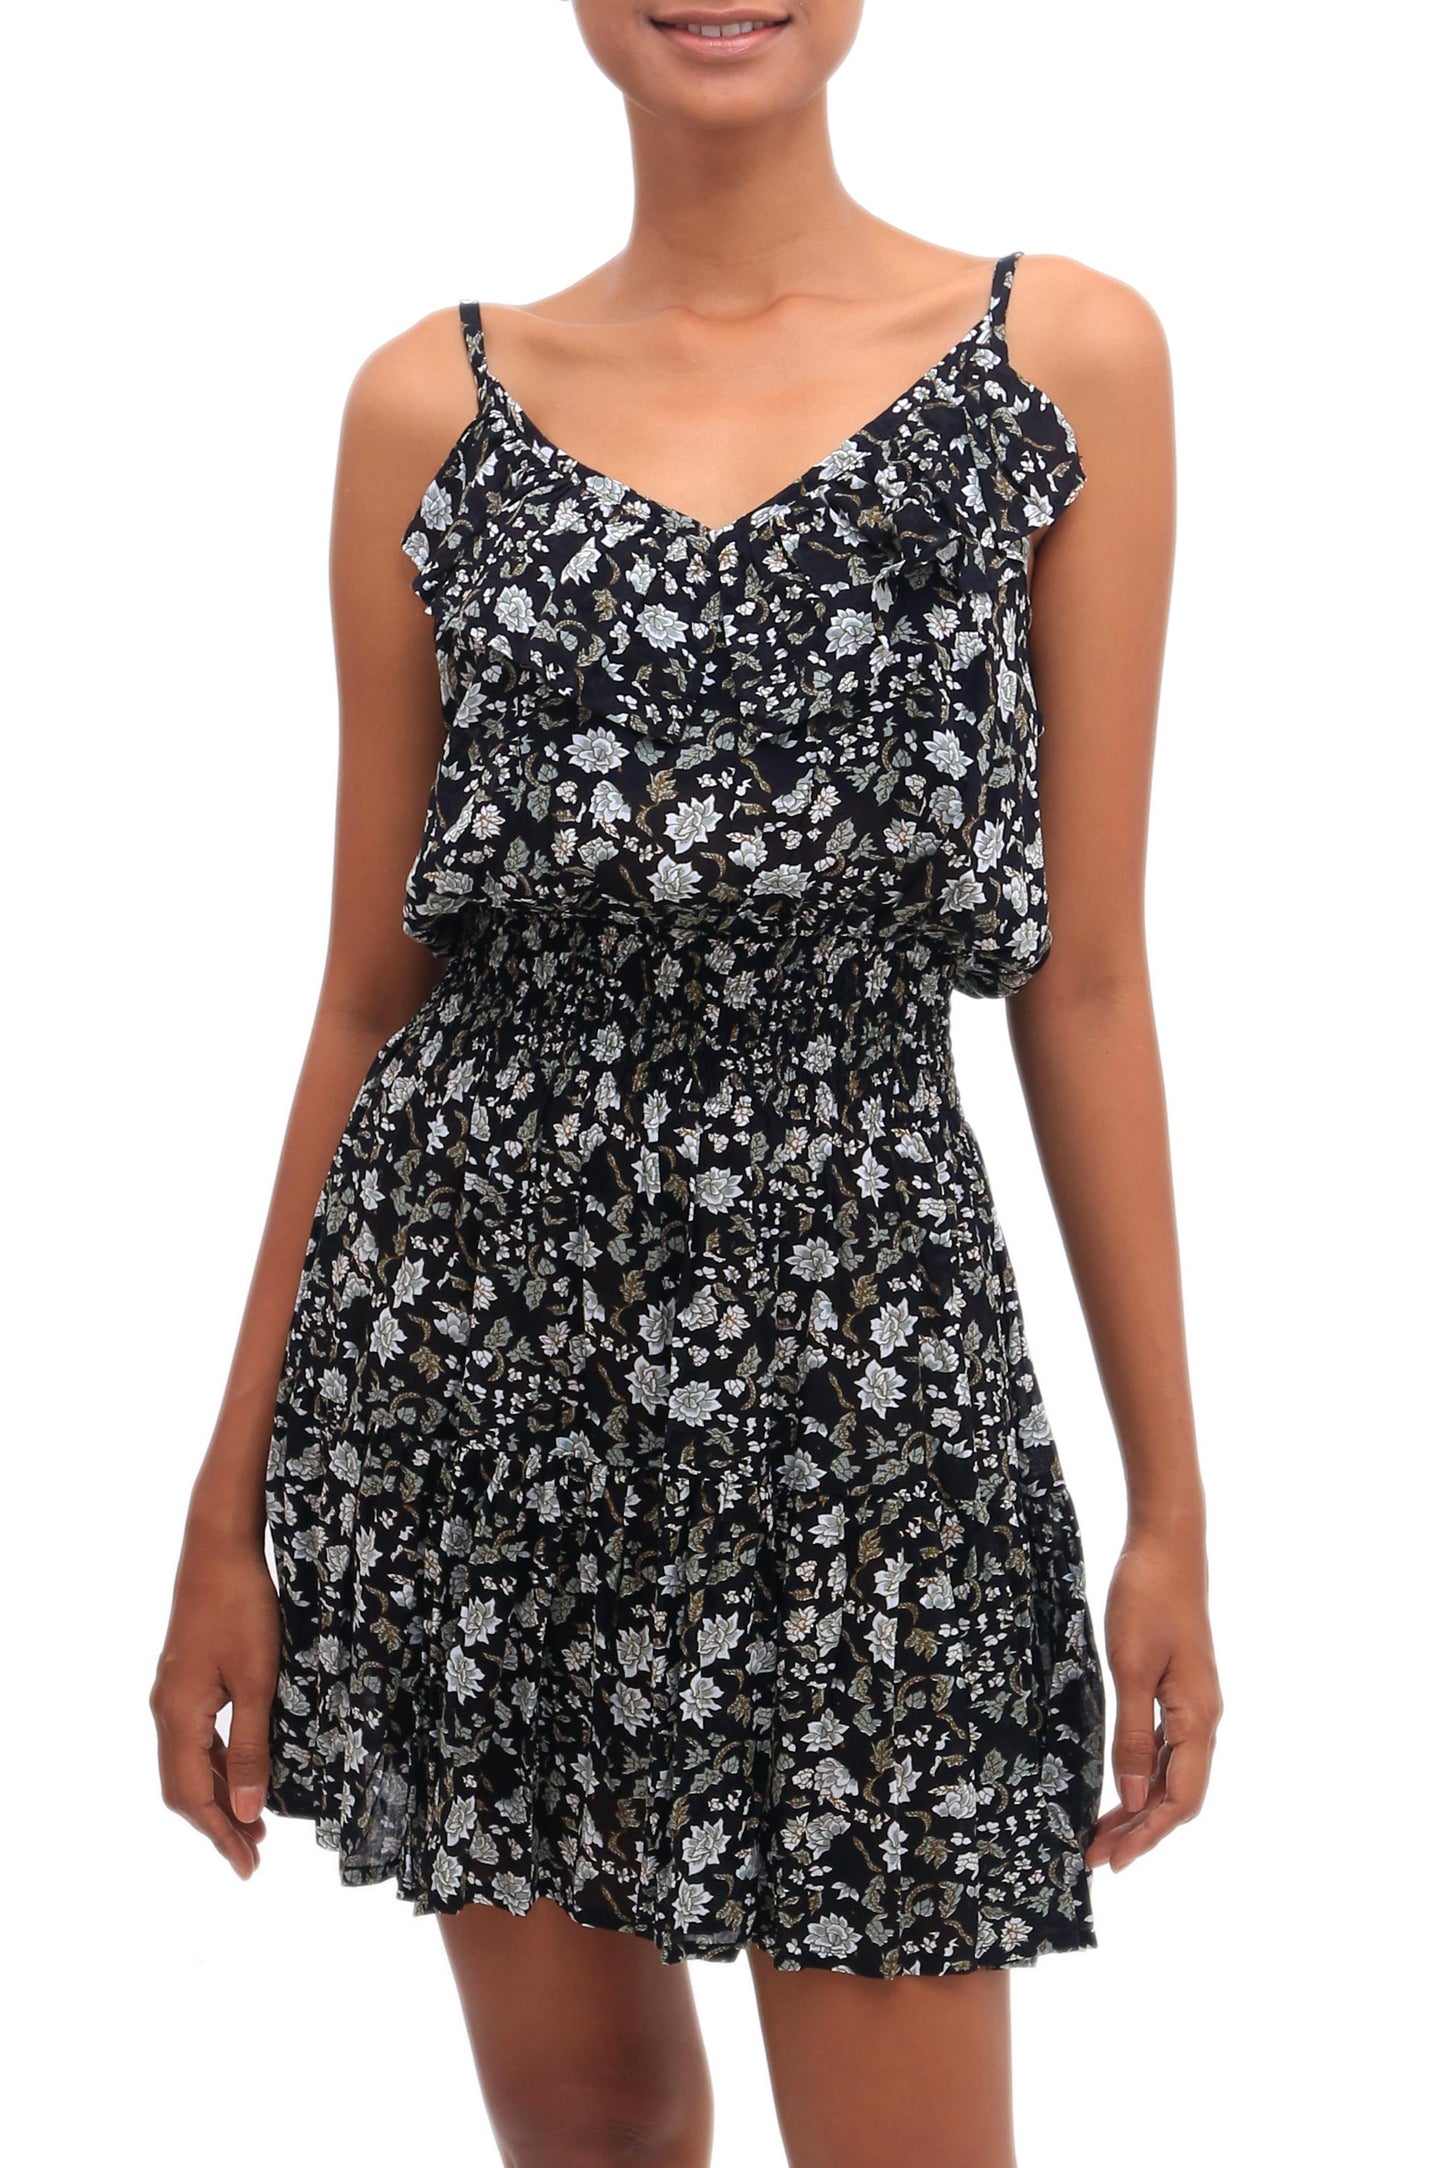 Venus Flowers Floral Printed Rayon Short Sundress from Bali